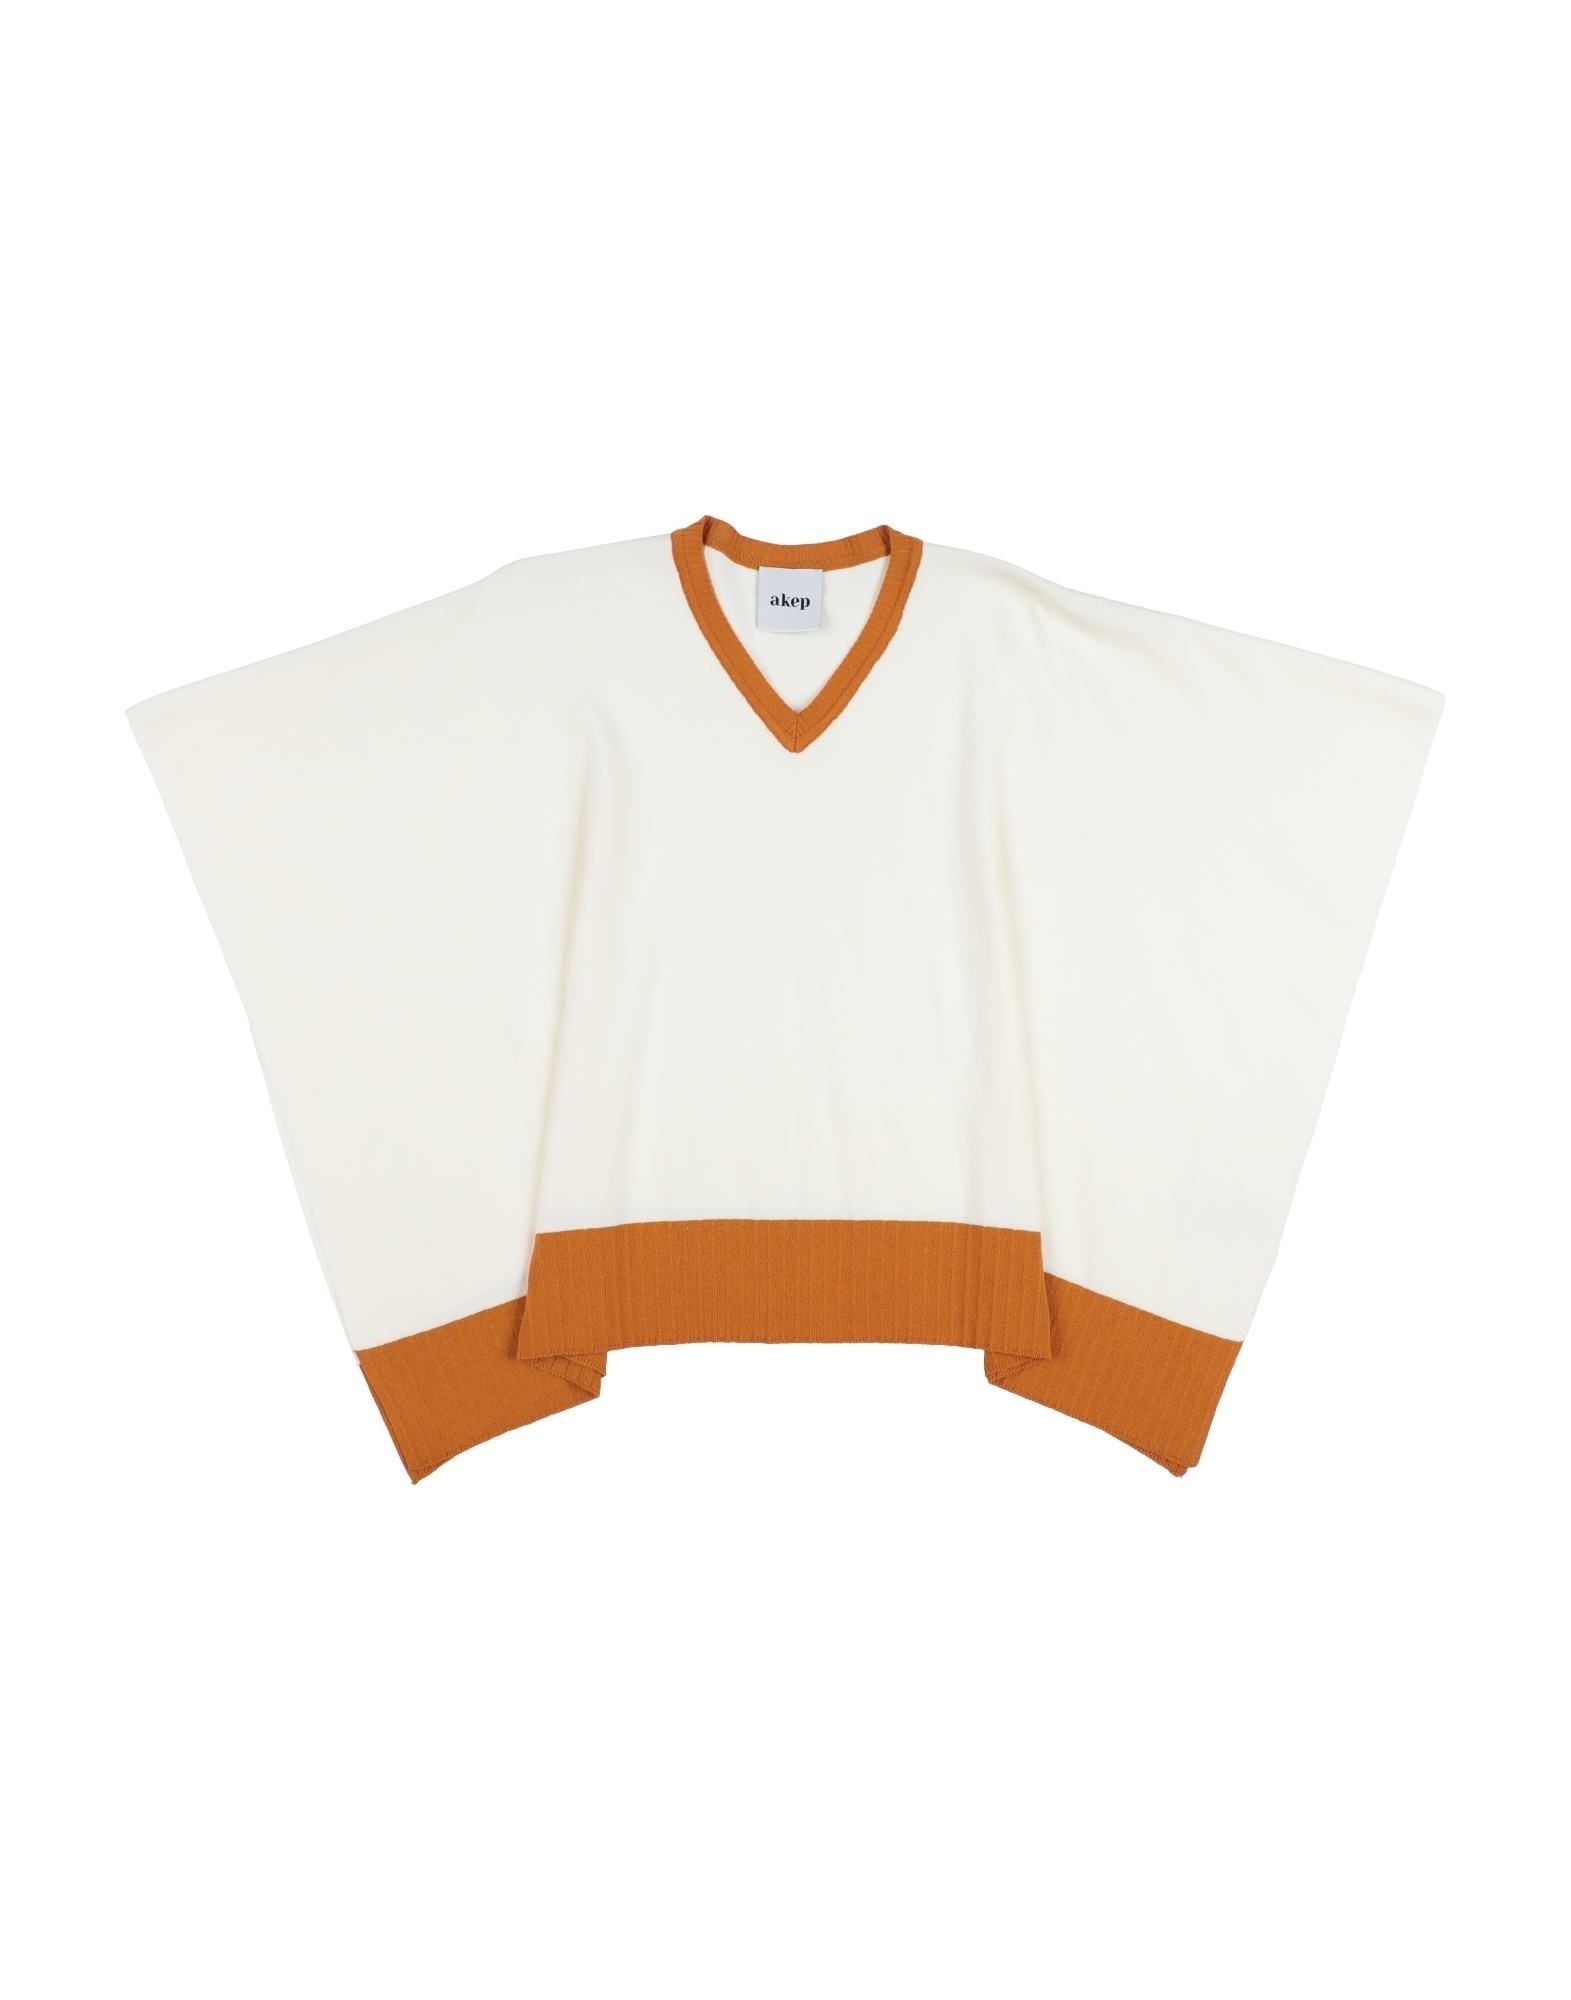 Akep Kids' Sweaters In Ivory